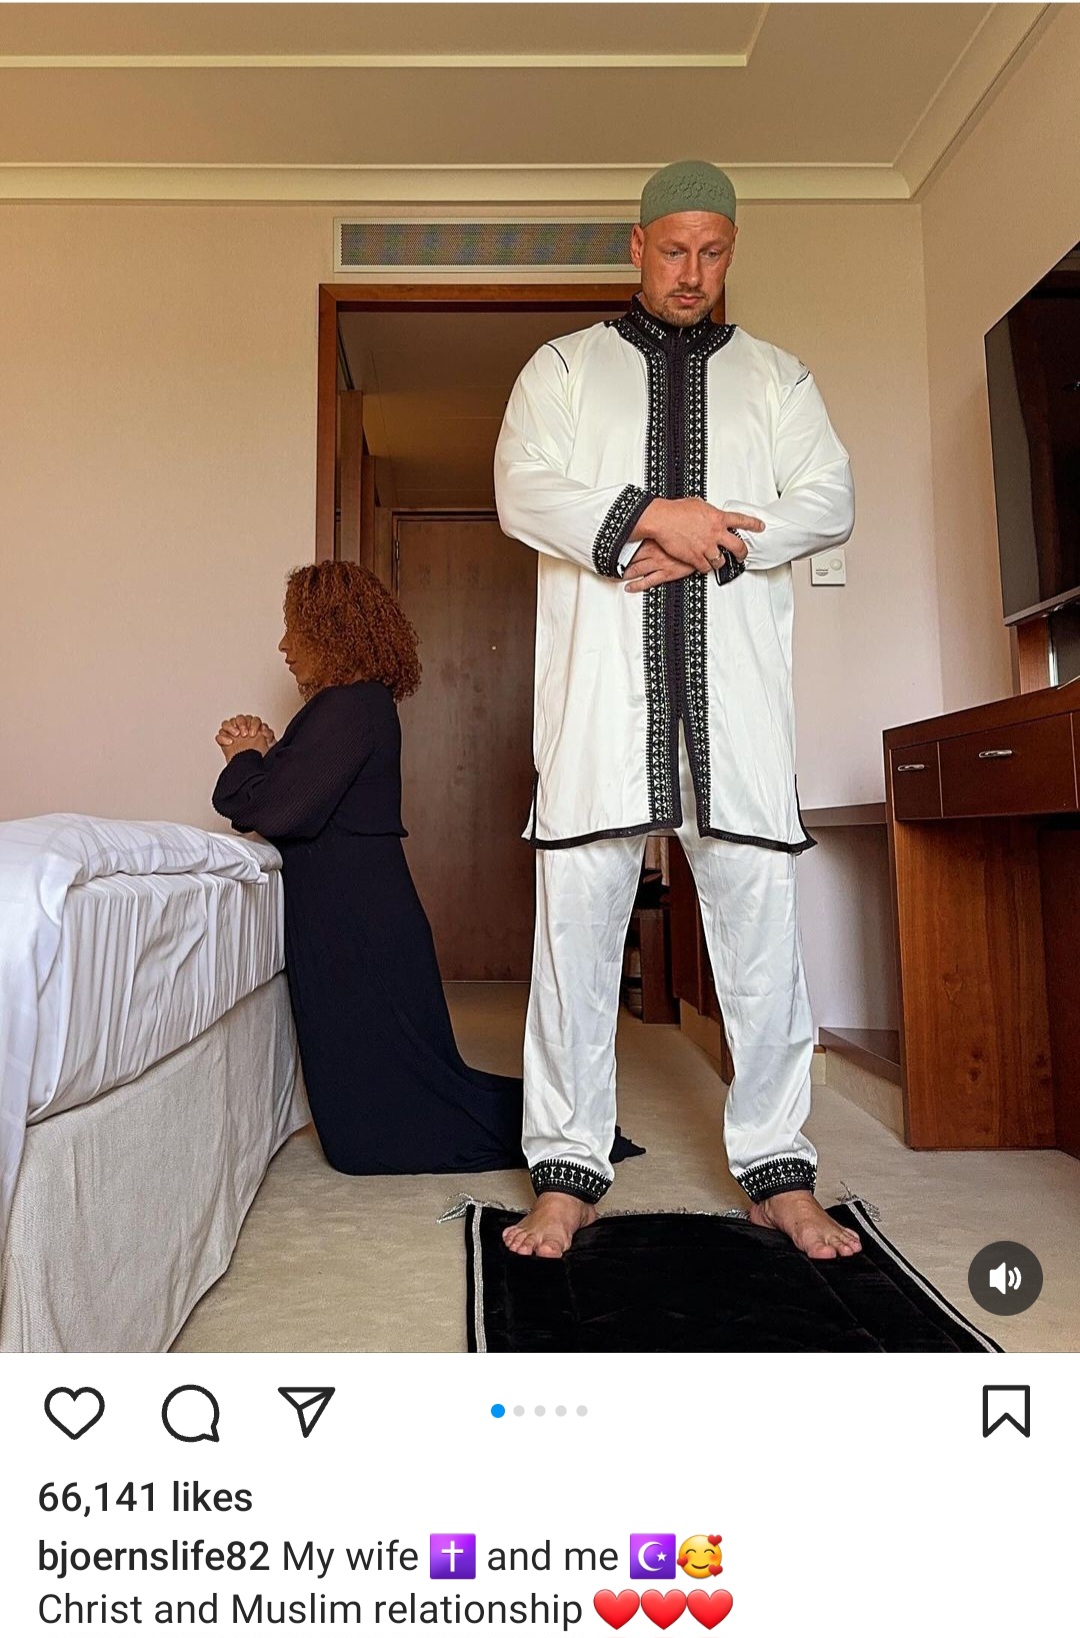 "Islam forbids this kind of relationship.  Your marriage is not legal in Islam." Muslim man criticised after sharing photos of him and his Christian wife praying in different ways